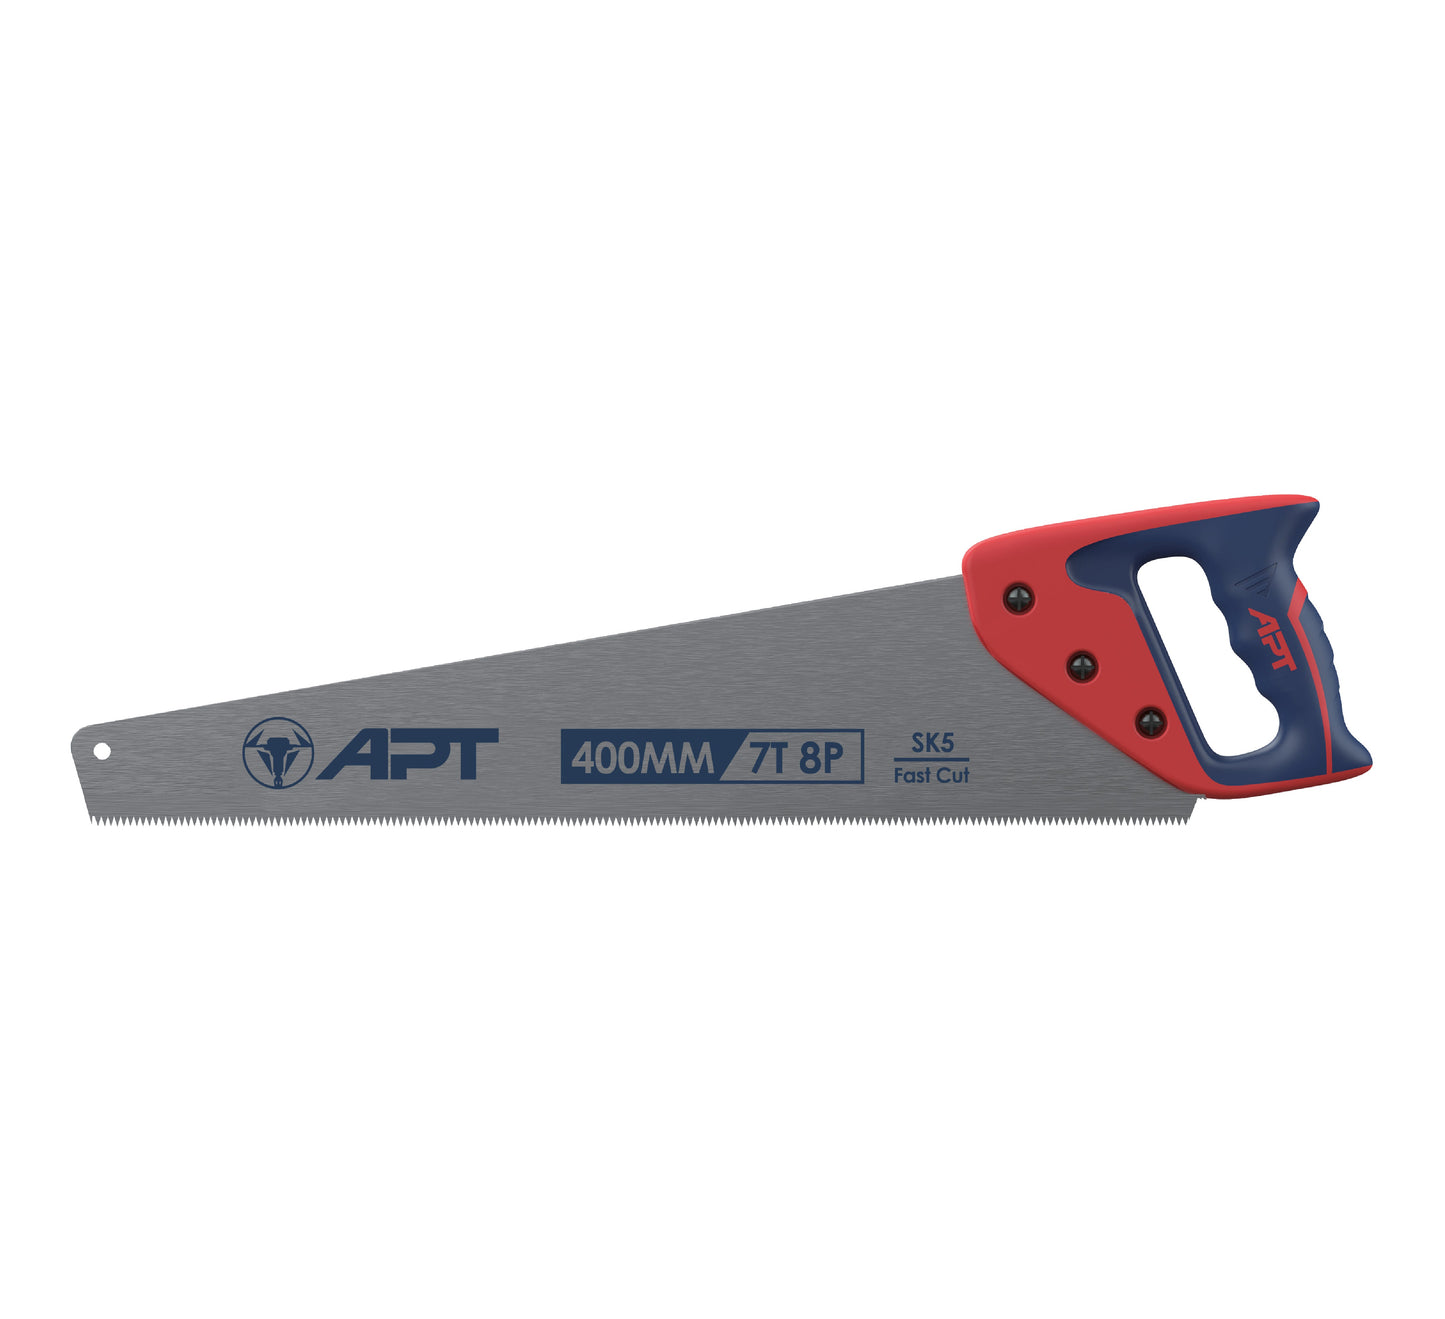 APT HAND SAW FOR WOOD APT NEW PLASTIC&RUBBER HANDLE 350MM-AH0121130-14-5013D-14"